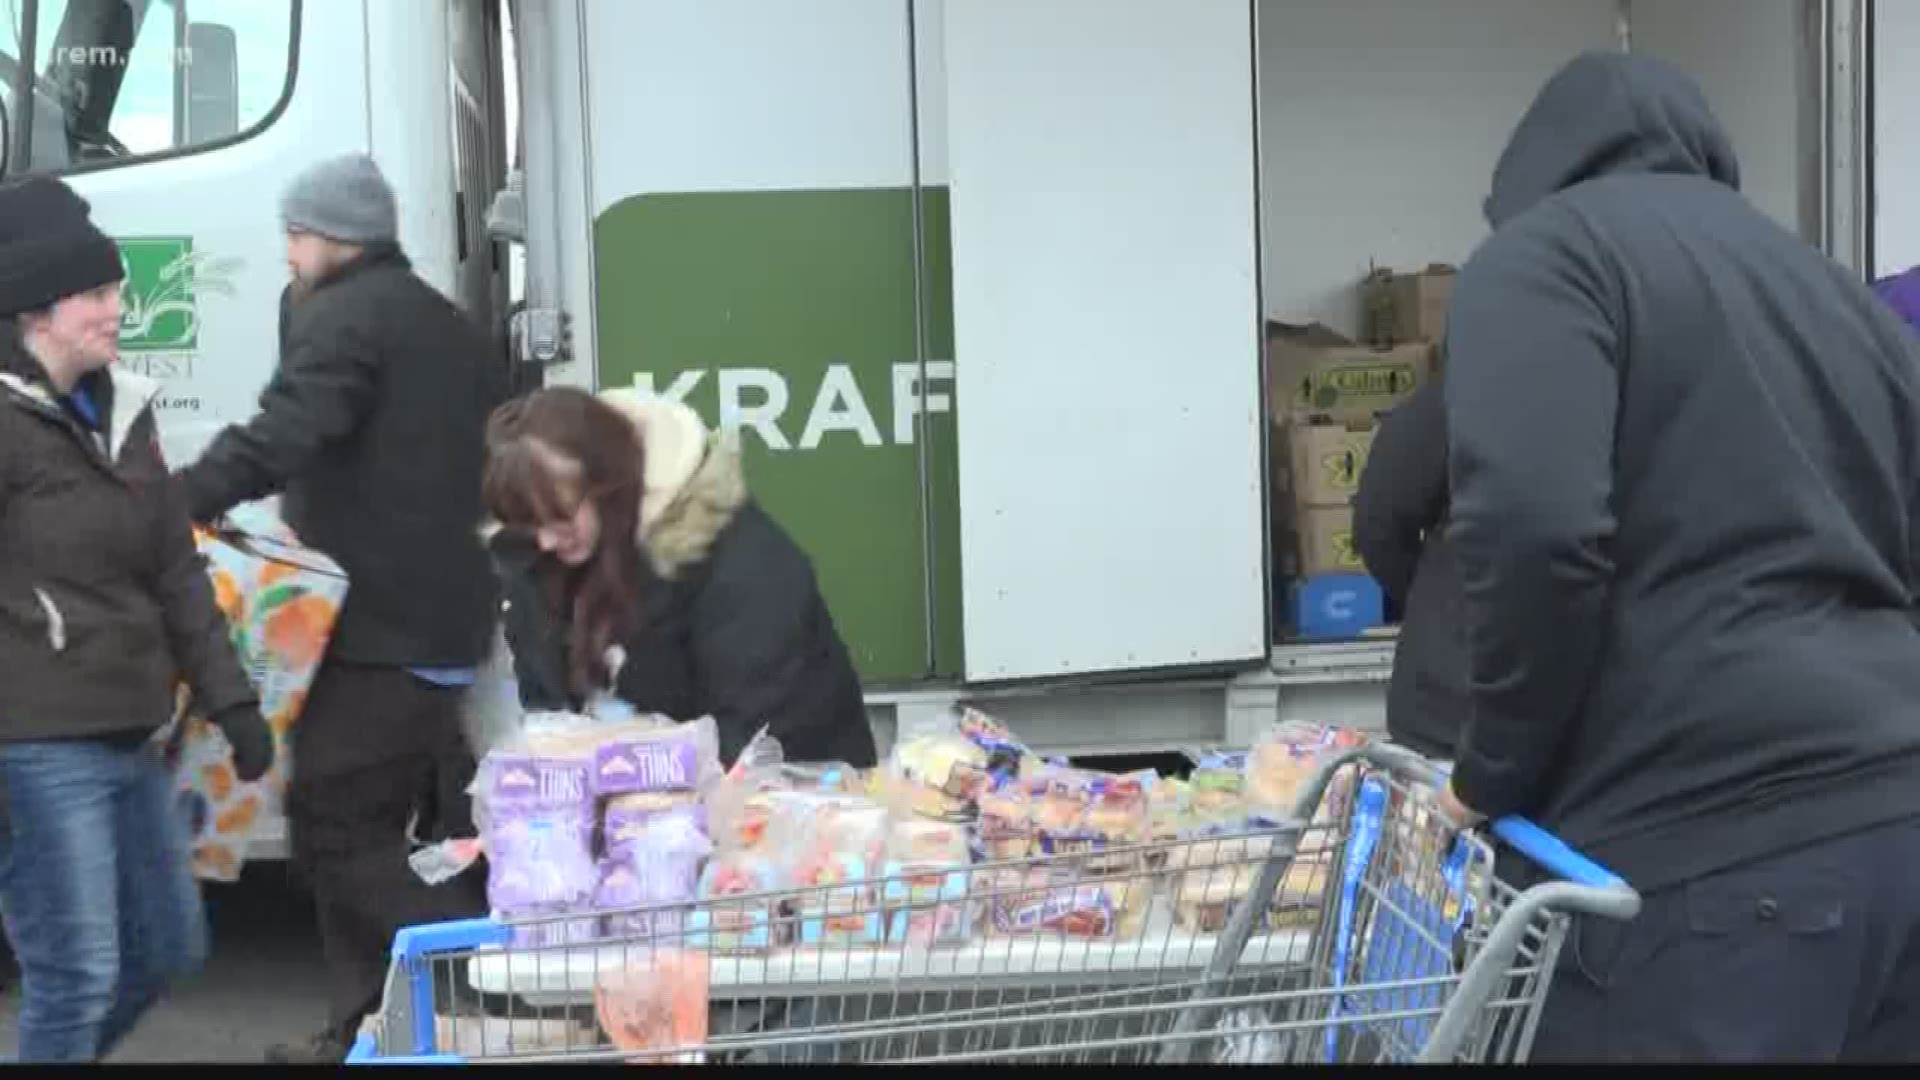 On a typical day, around noon, Anthony Scott would be leaving the airport after his TSA shift. Tuesday he left work at that time, but not to head home. Instead, he came to a Second Harvest Food Bank to pick up food for his family.